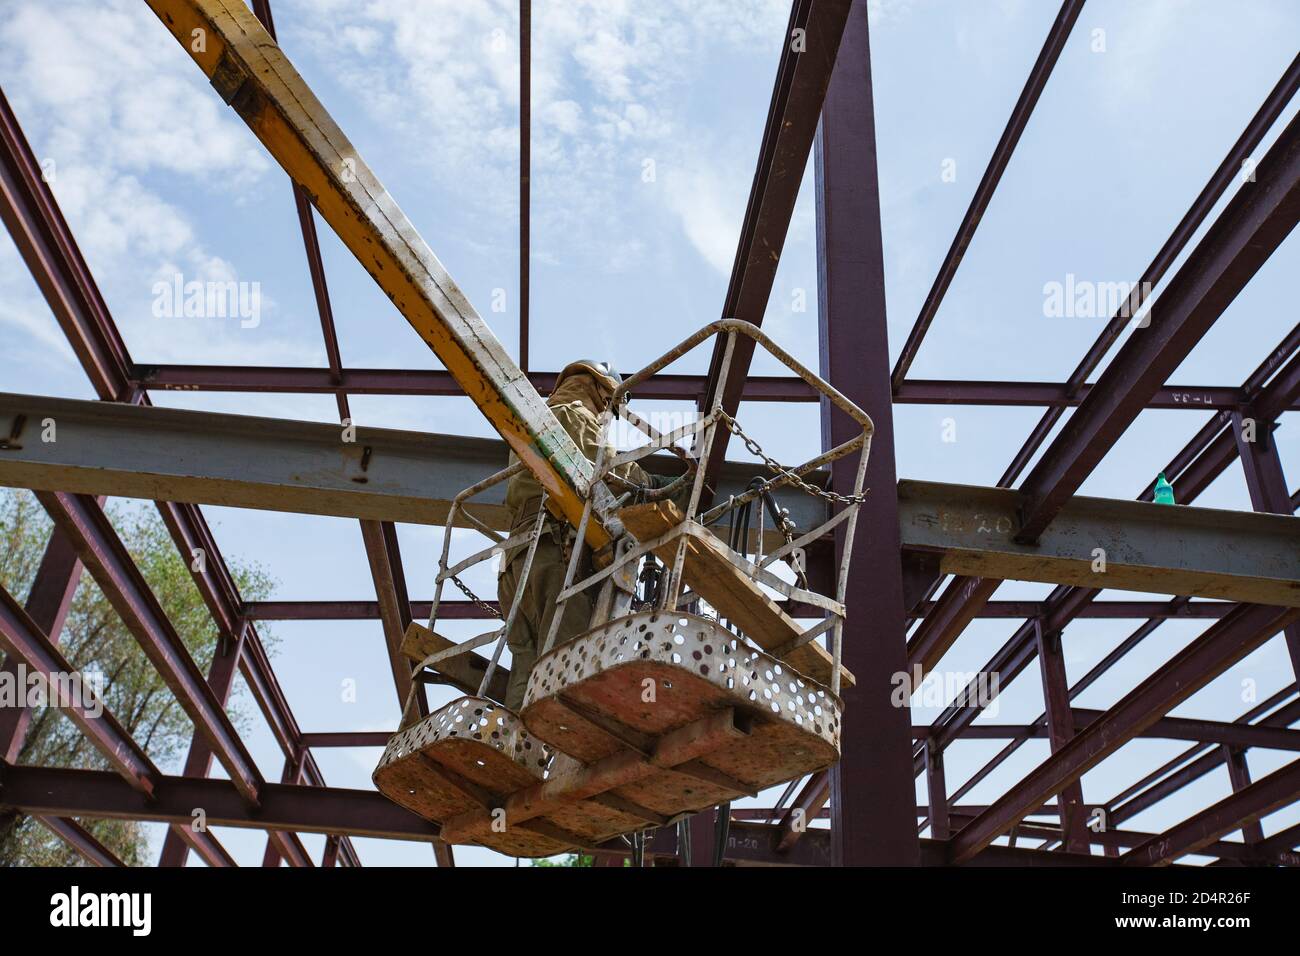 Welding worker on mobile crane craddle. Assembling of new industrial building structure. No face. Stock Photo